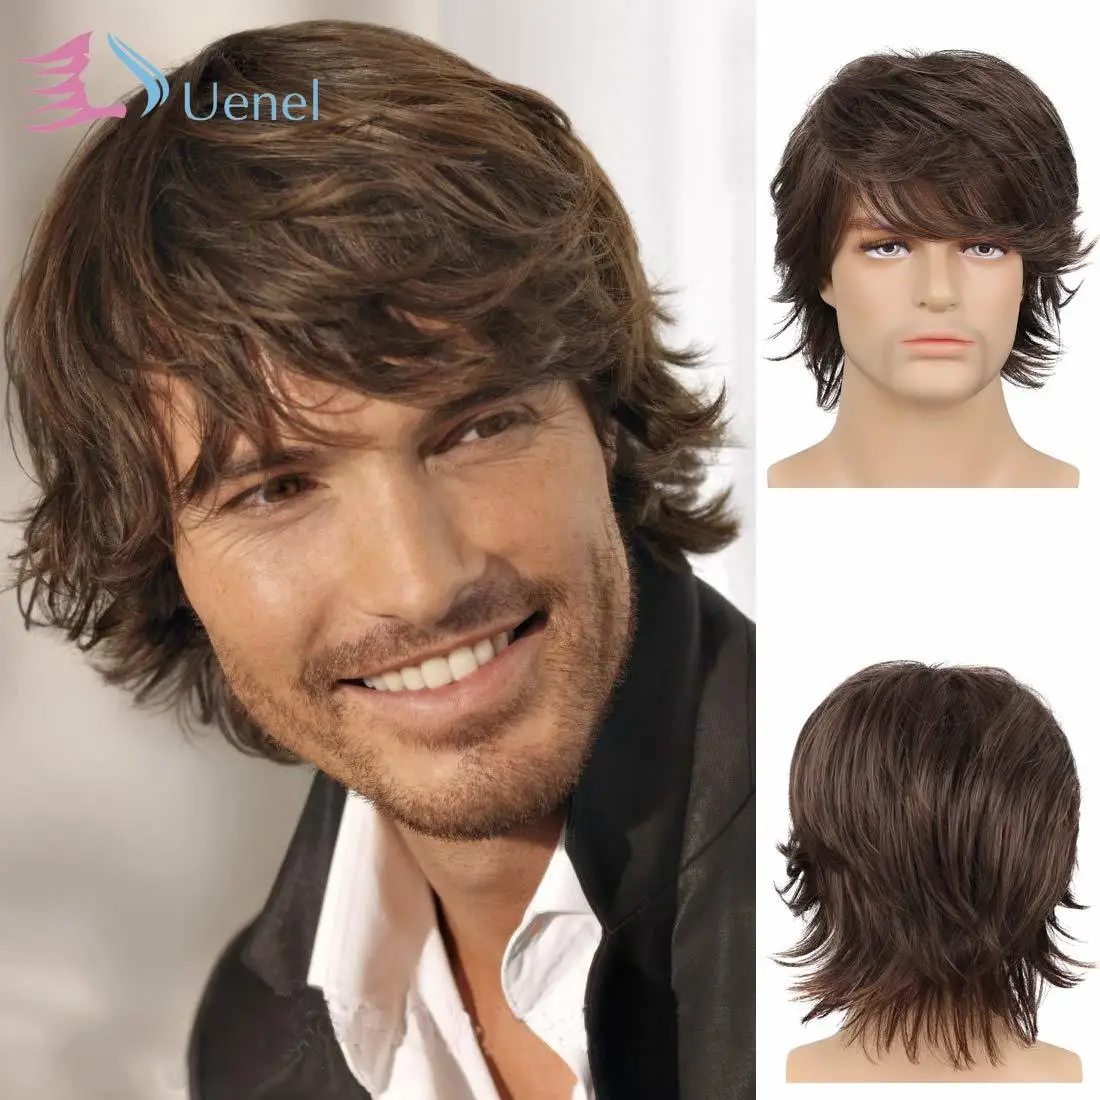 

Uenel Brown Wig Men's Short Layered Curly Wavy Wigs for Men Synthetic Hair Wigs Heat Resistant with Wig Cap Cosplay Halloween